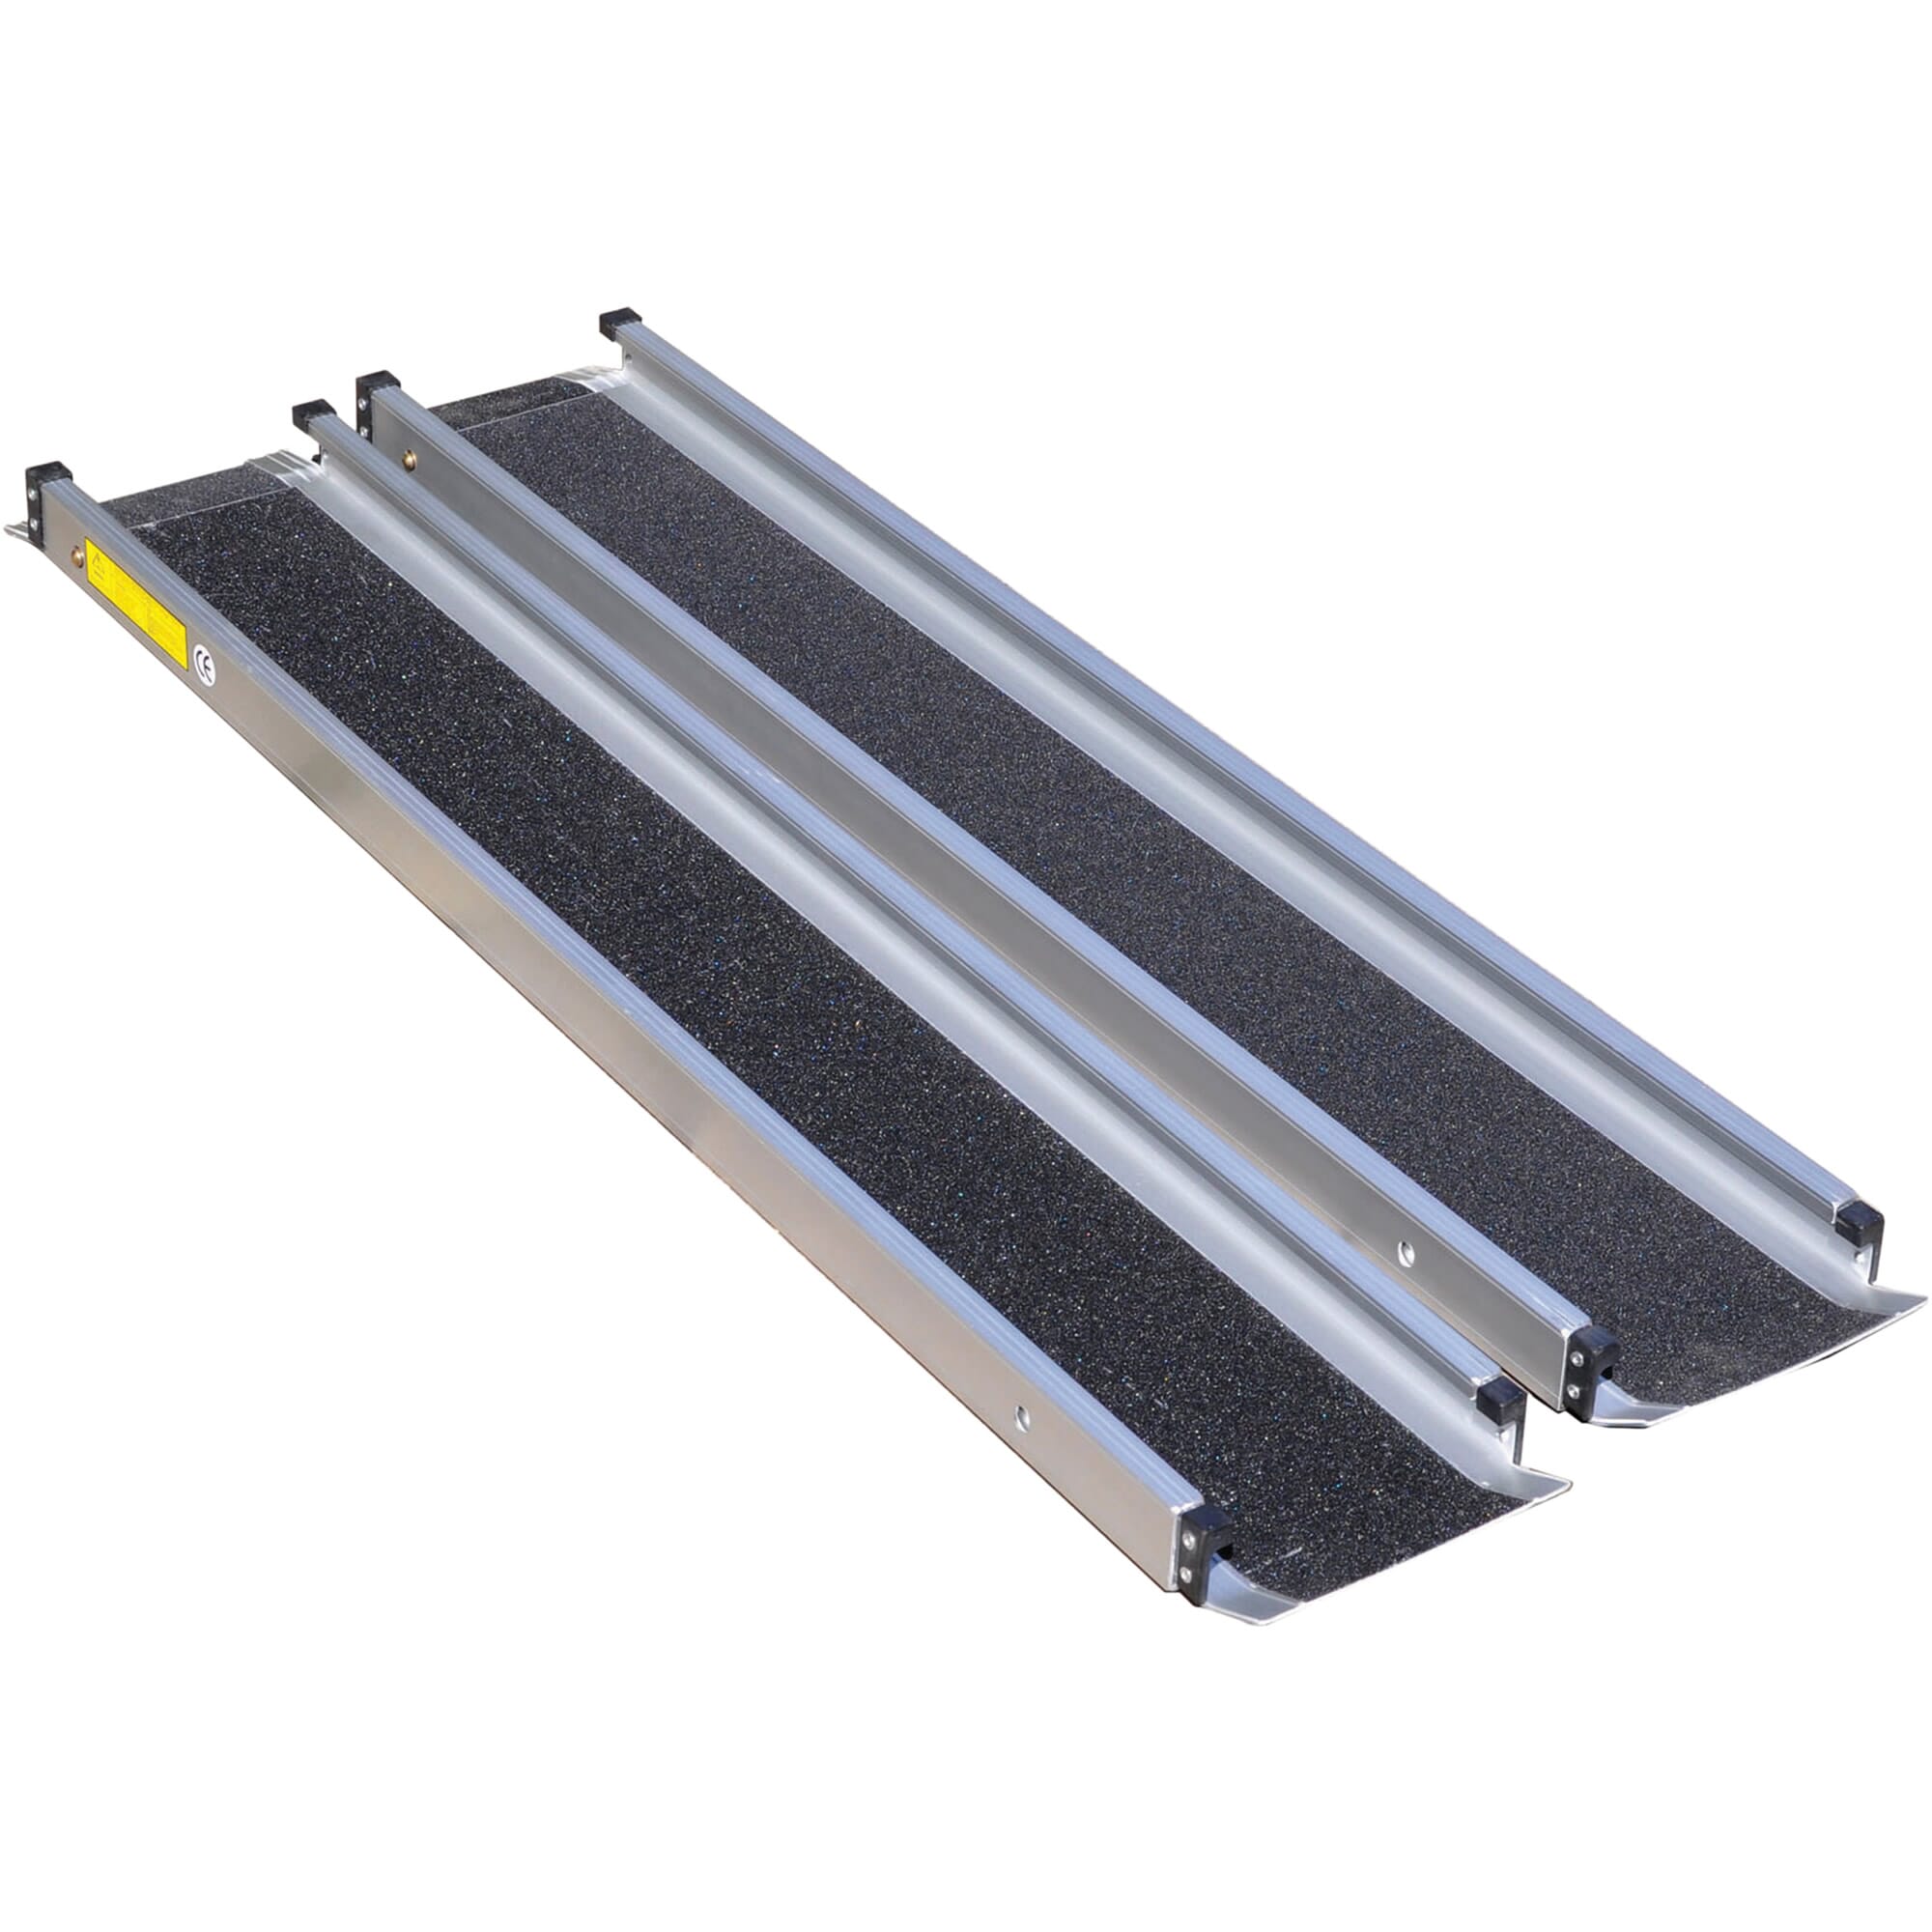 View Telescopic NonSlip Channel Ramps 6ft information